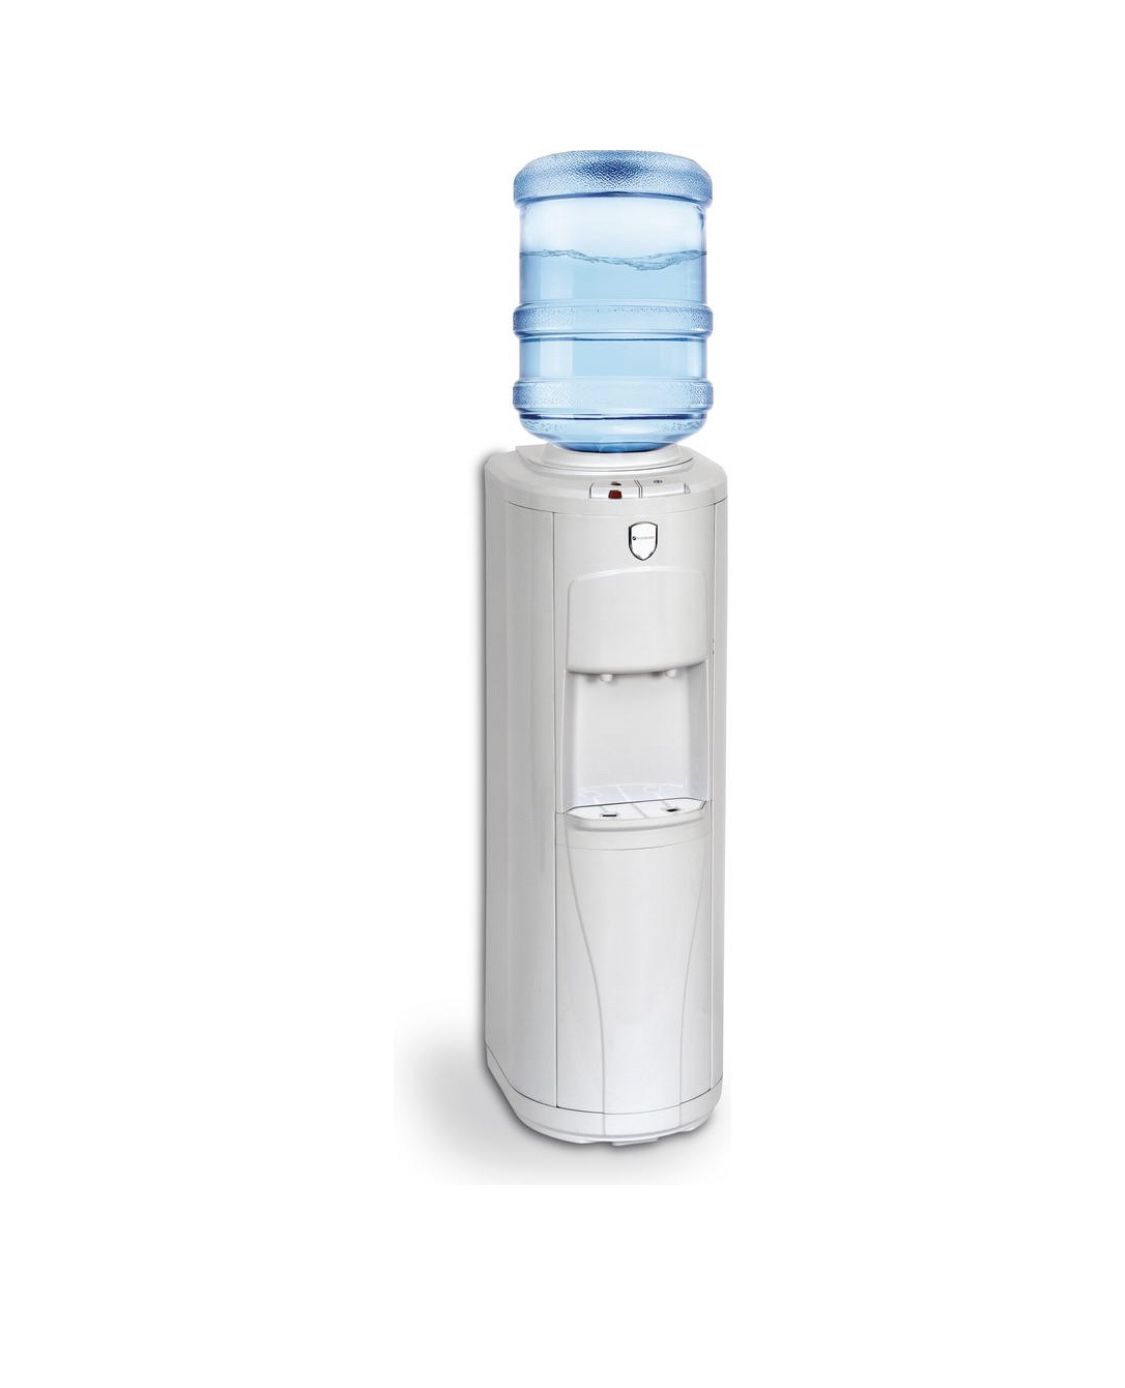 Cold Water Dispenser & 3 three refill containers